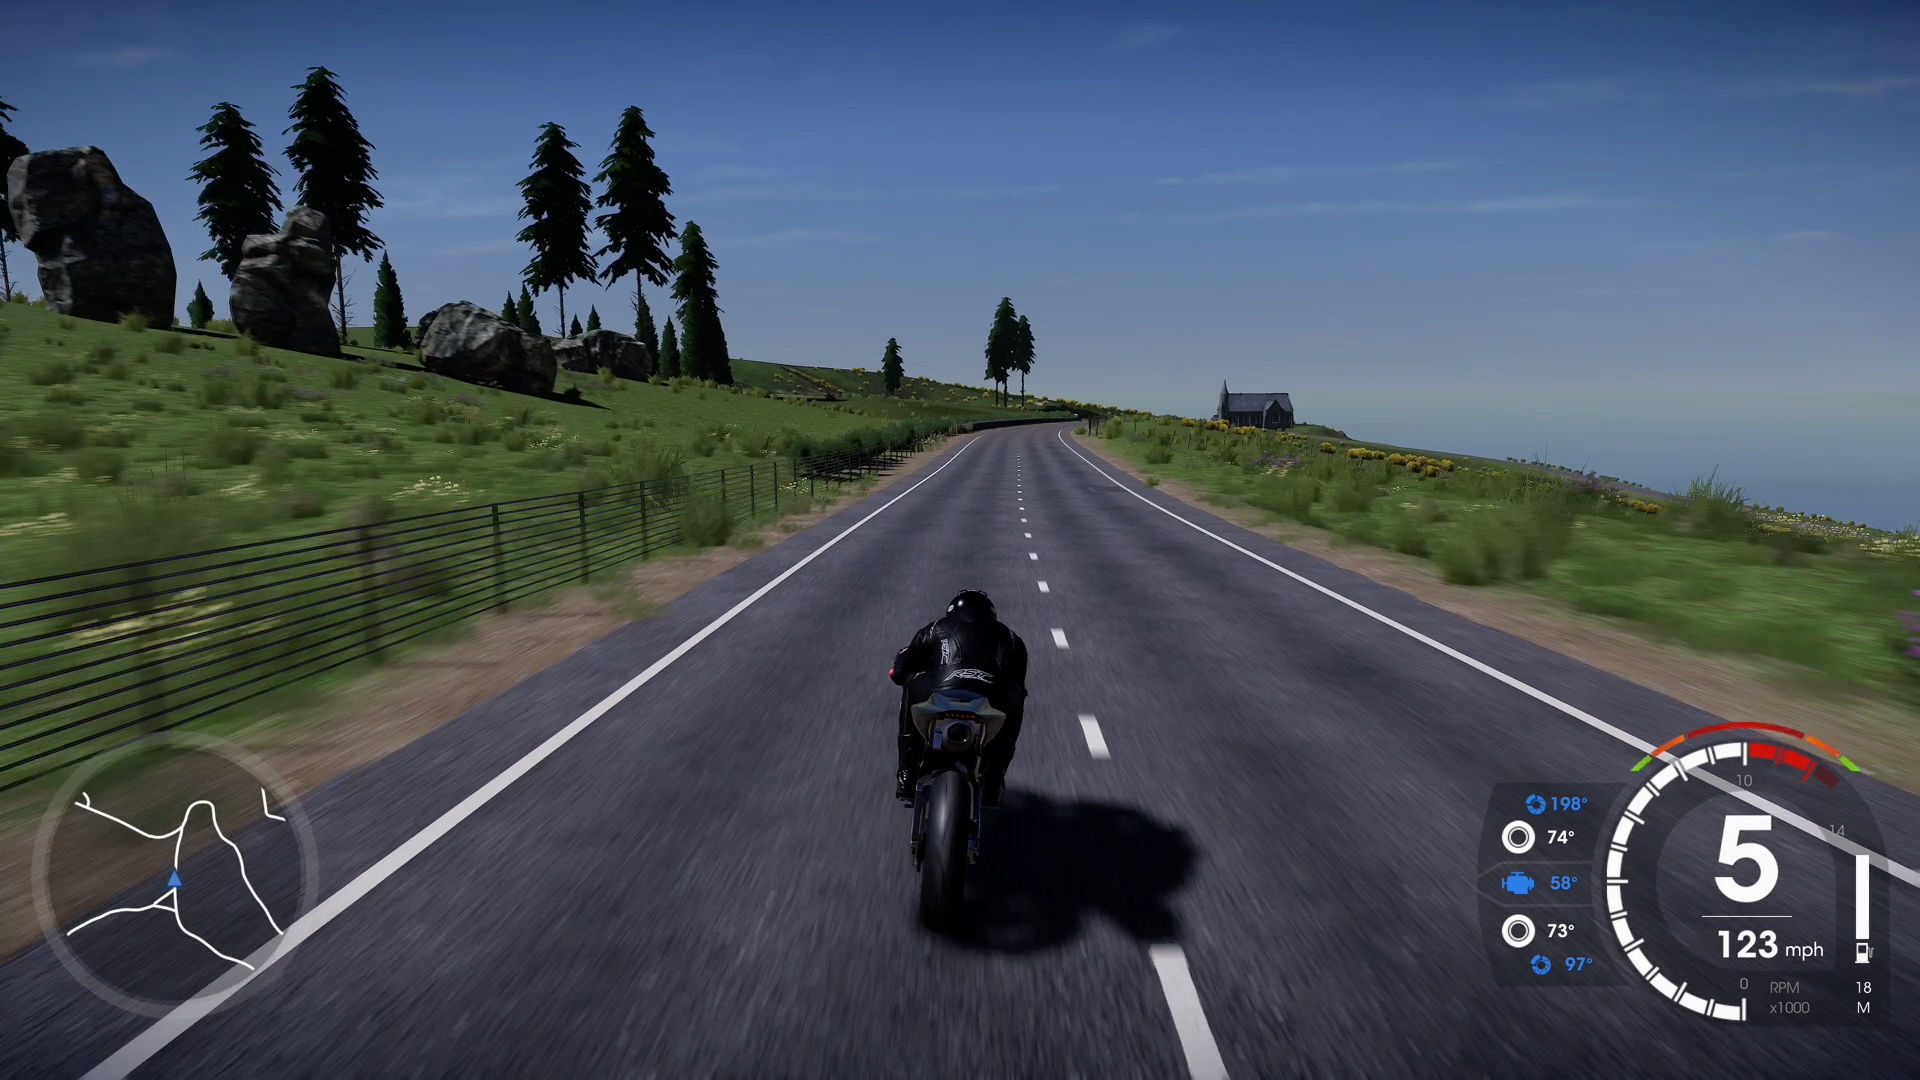 TT Isle of Man: Ride on the Edge 2 review - Open world gameplay